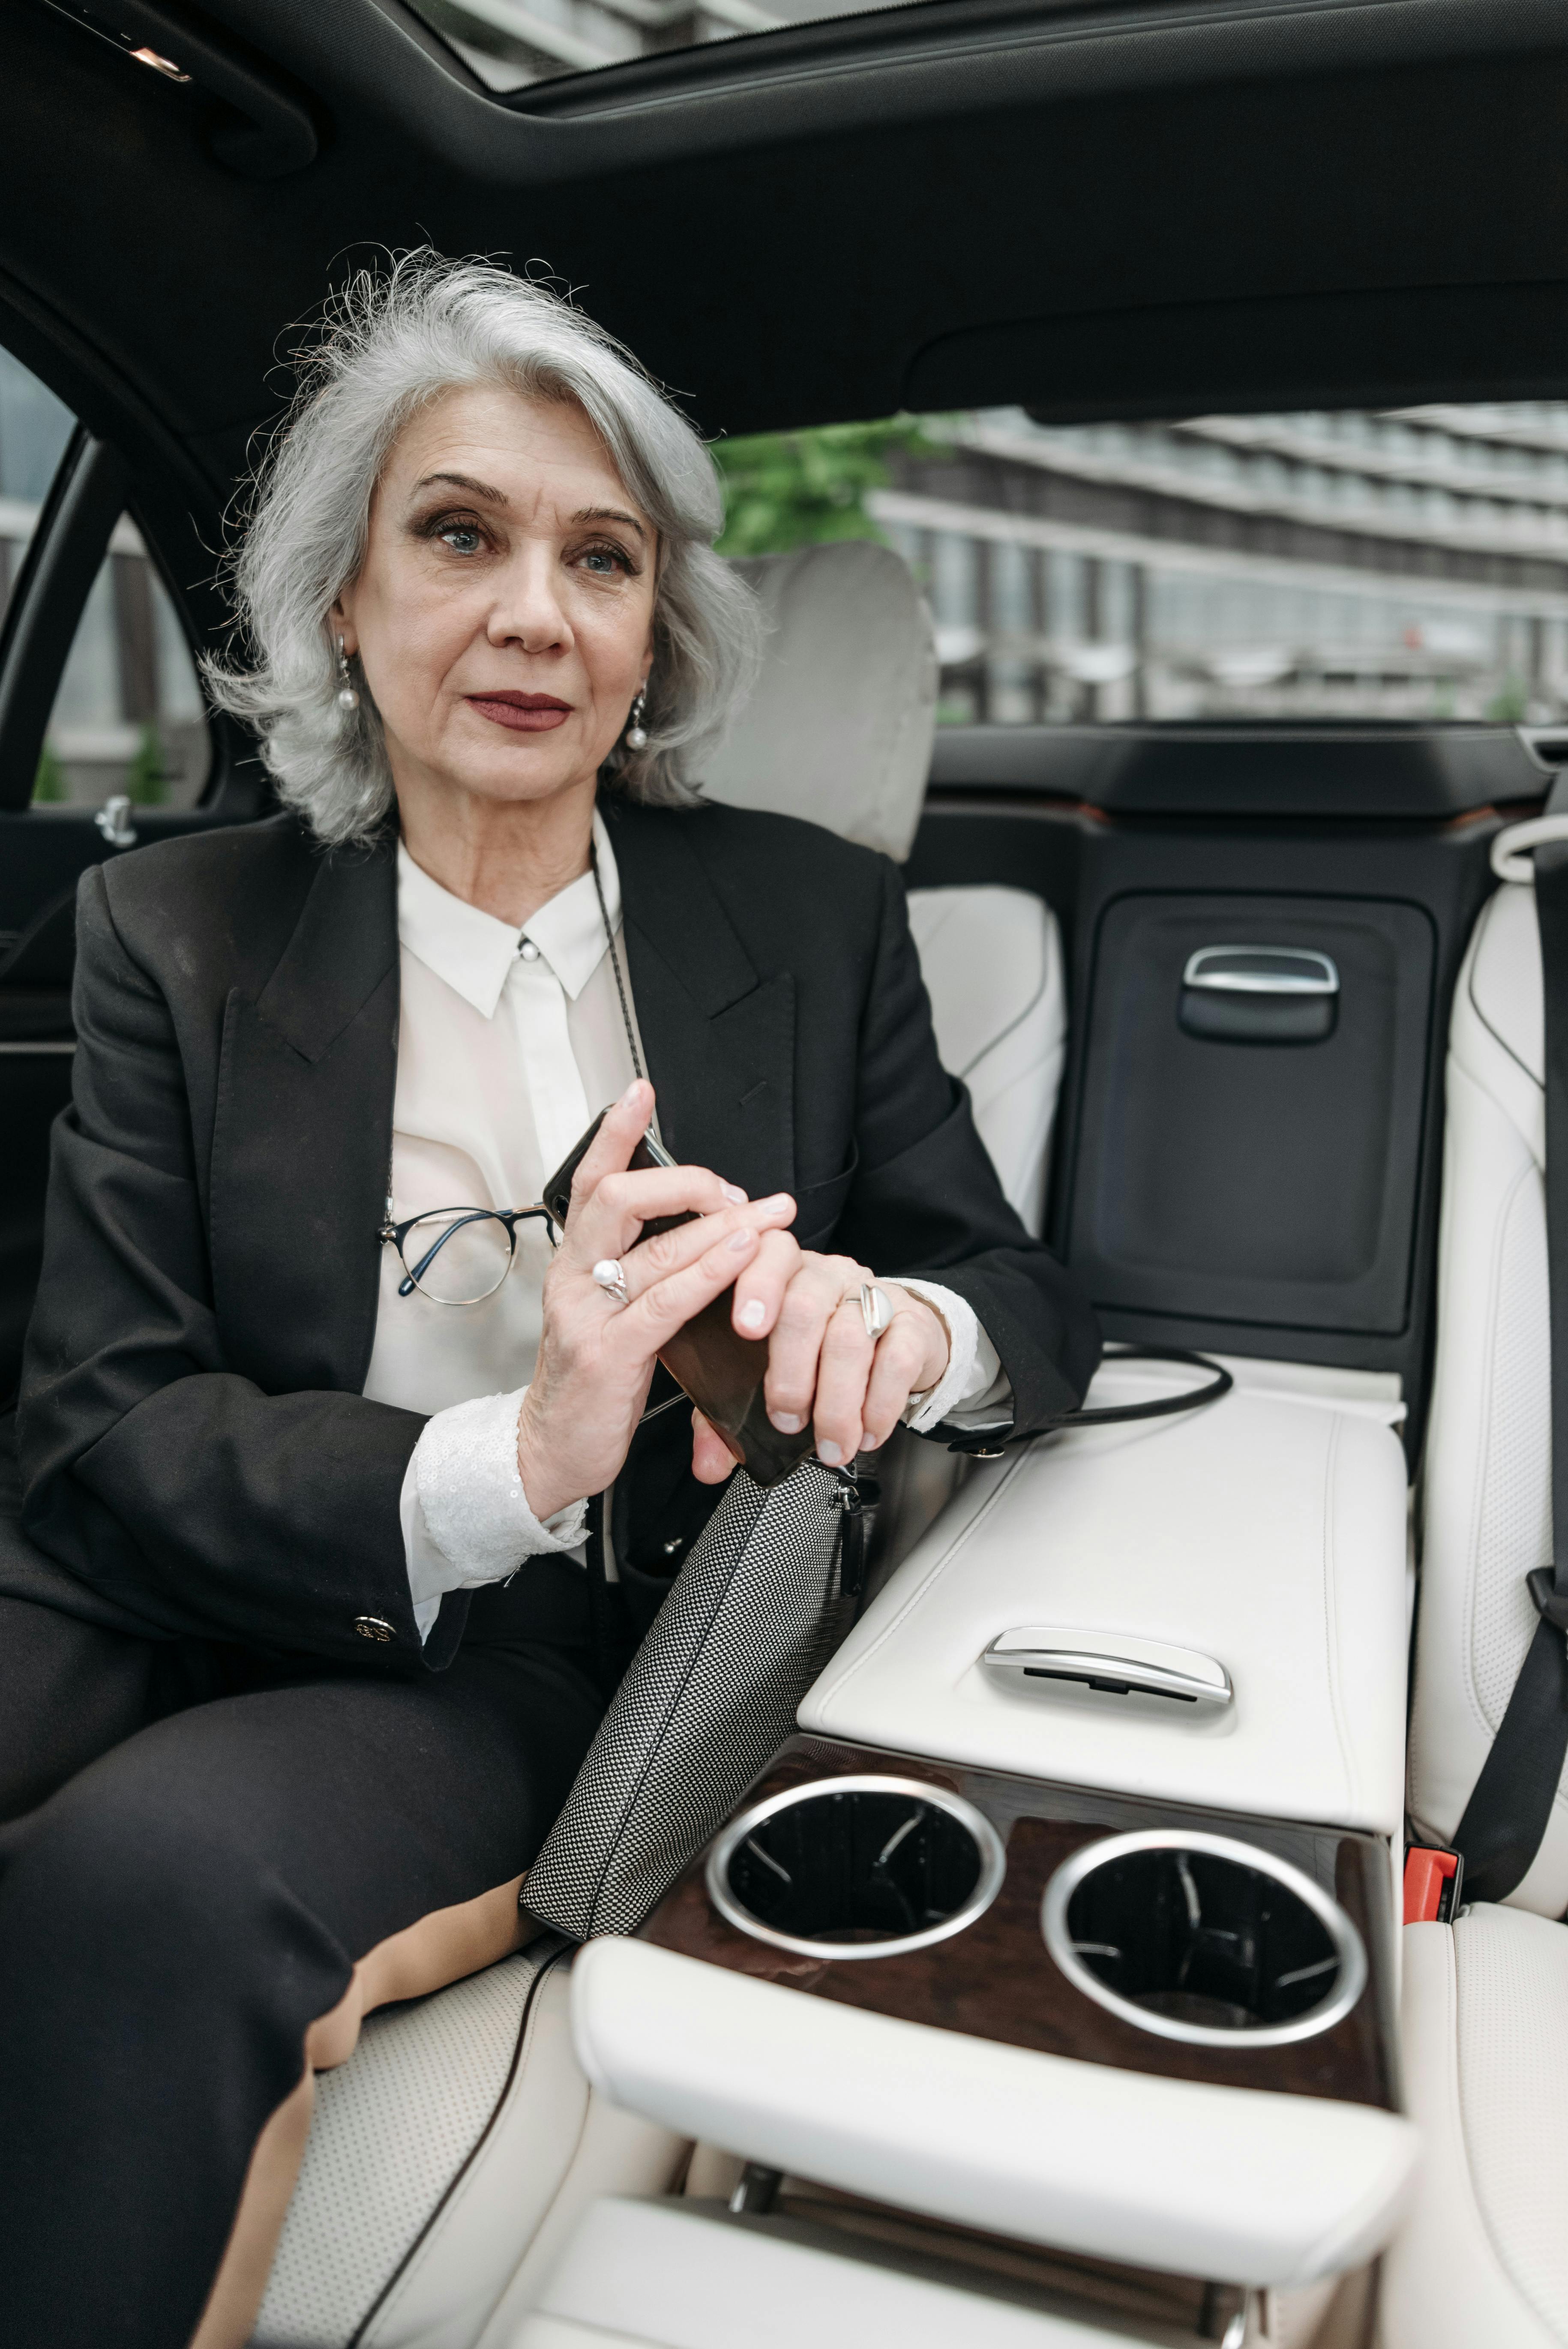 The elderly woman in the back of the car | Source: Pexels